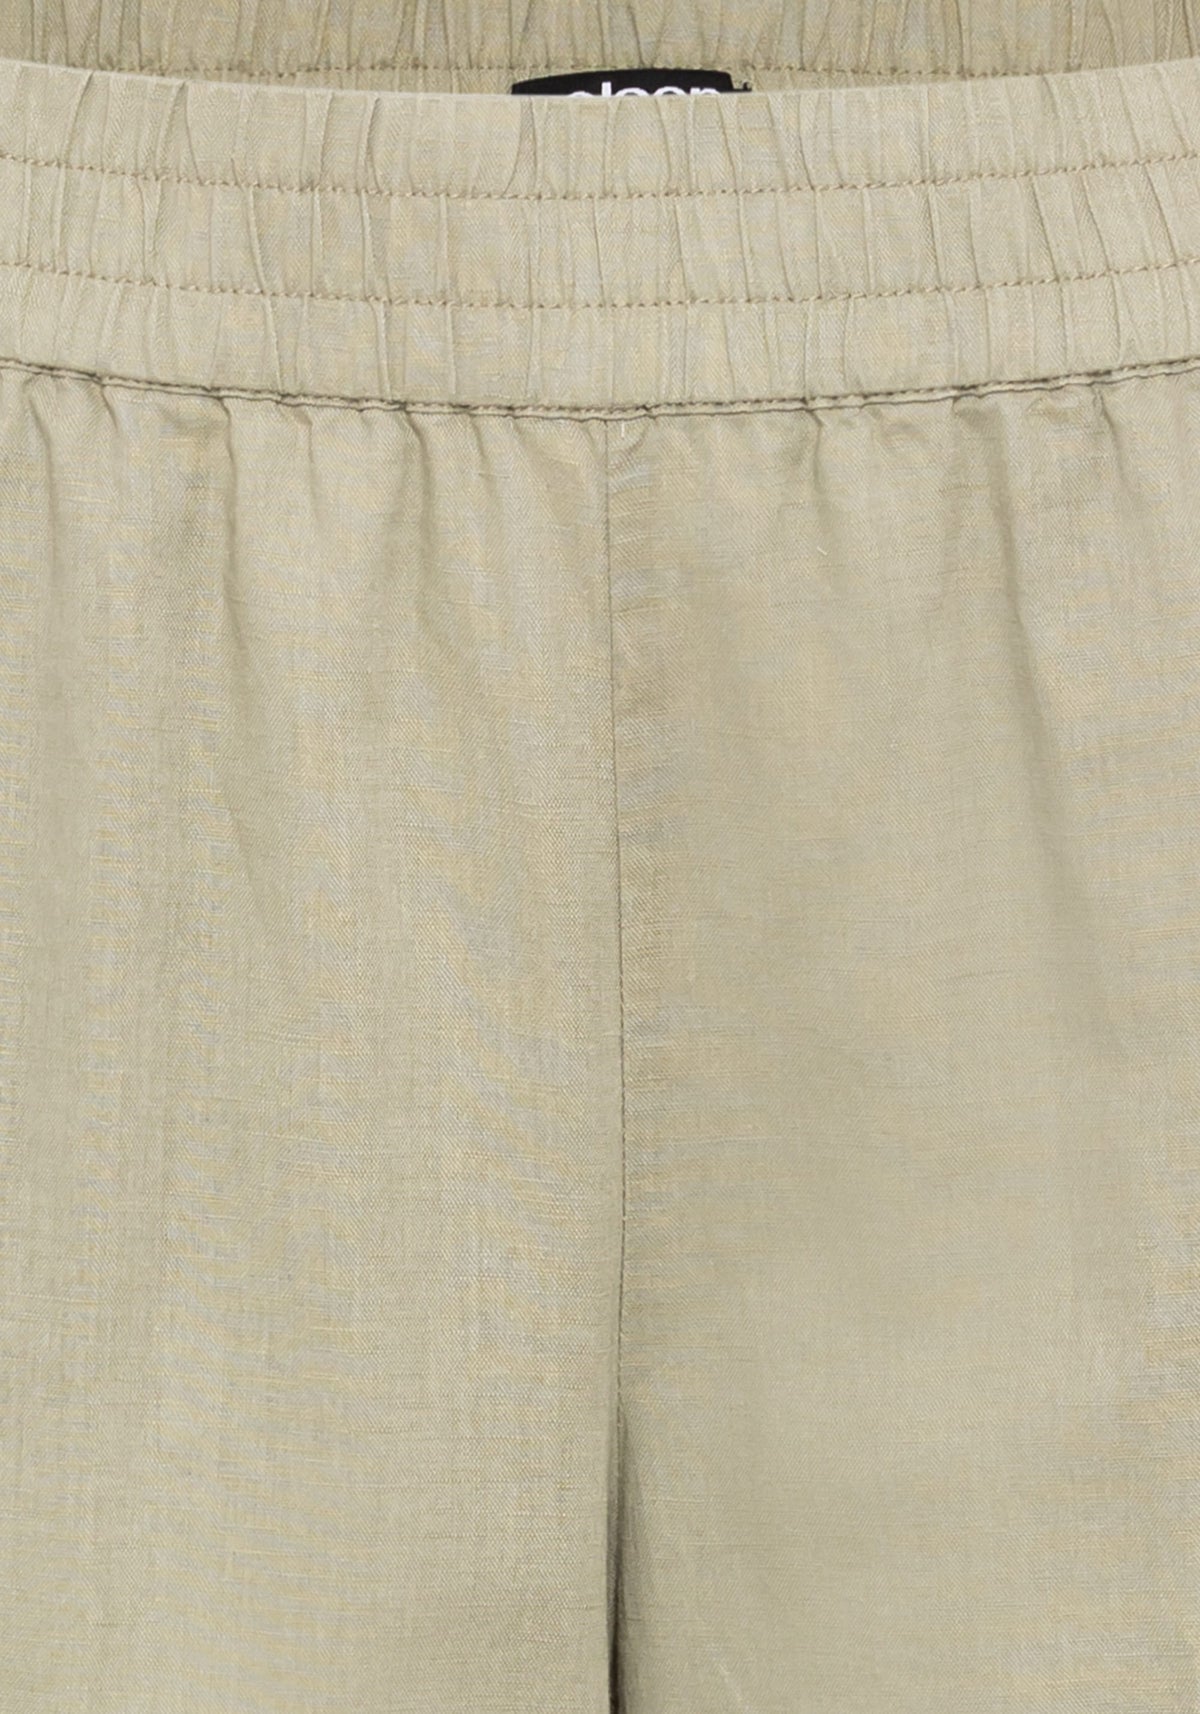 Anna Fit Wide Leg Cotton Linen Pull-On Culottes